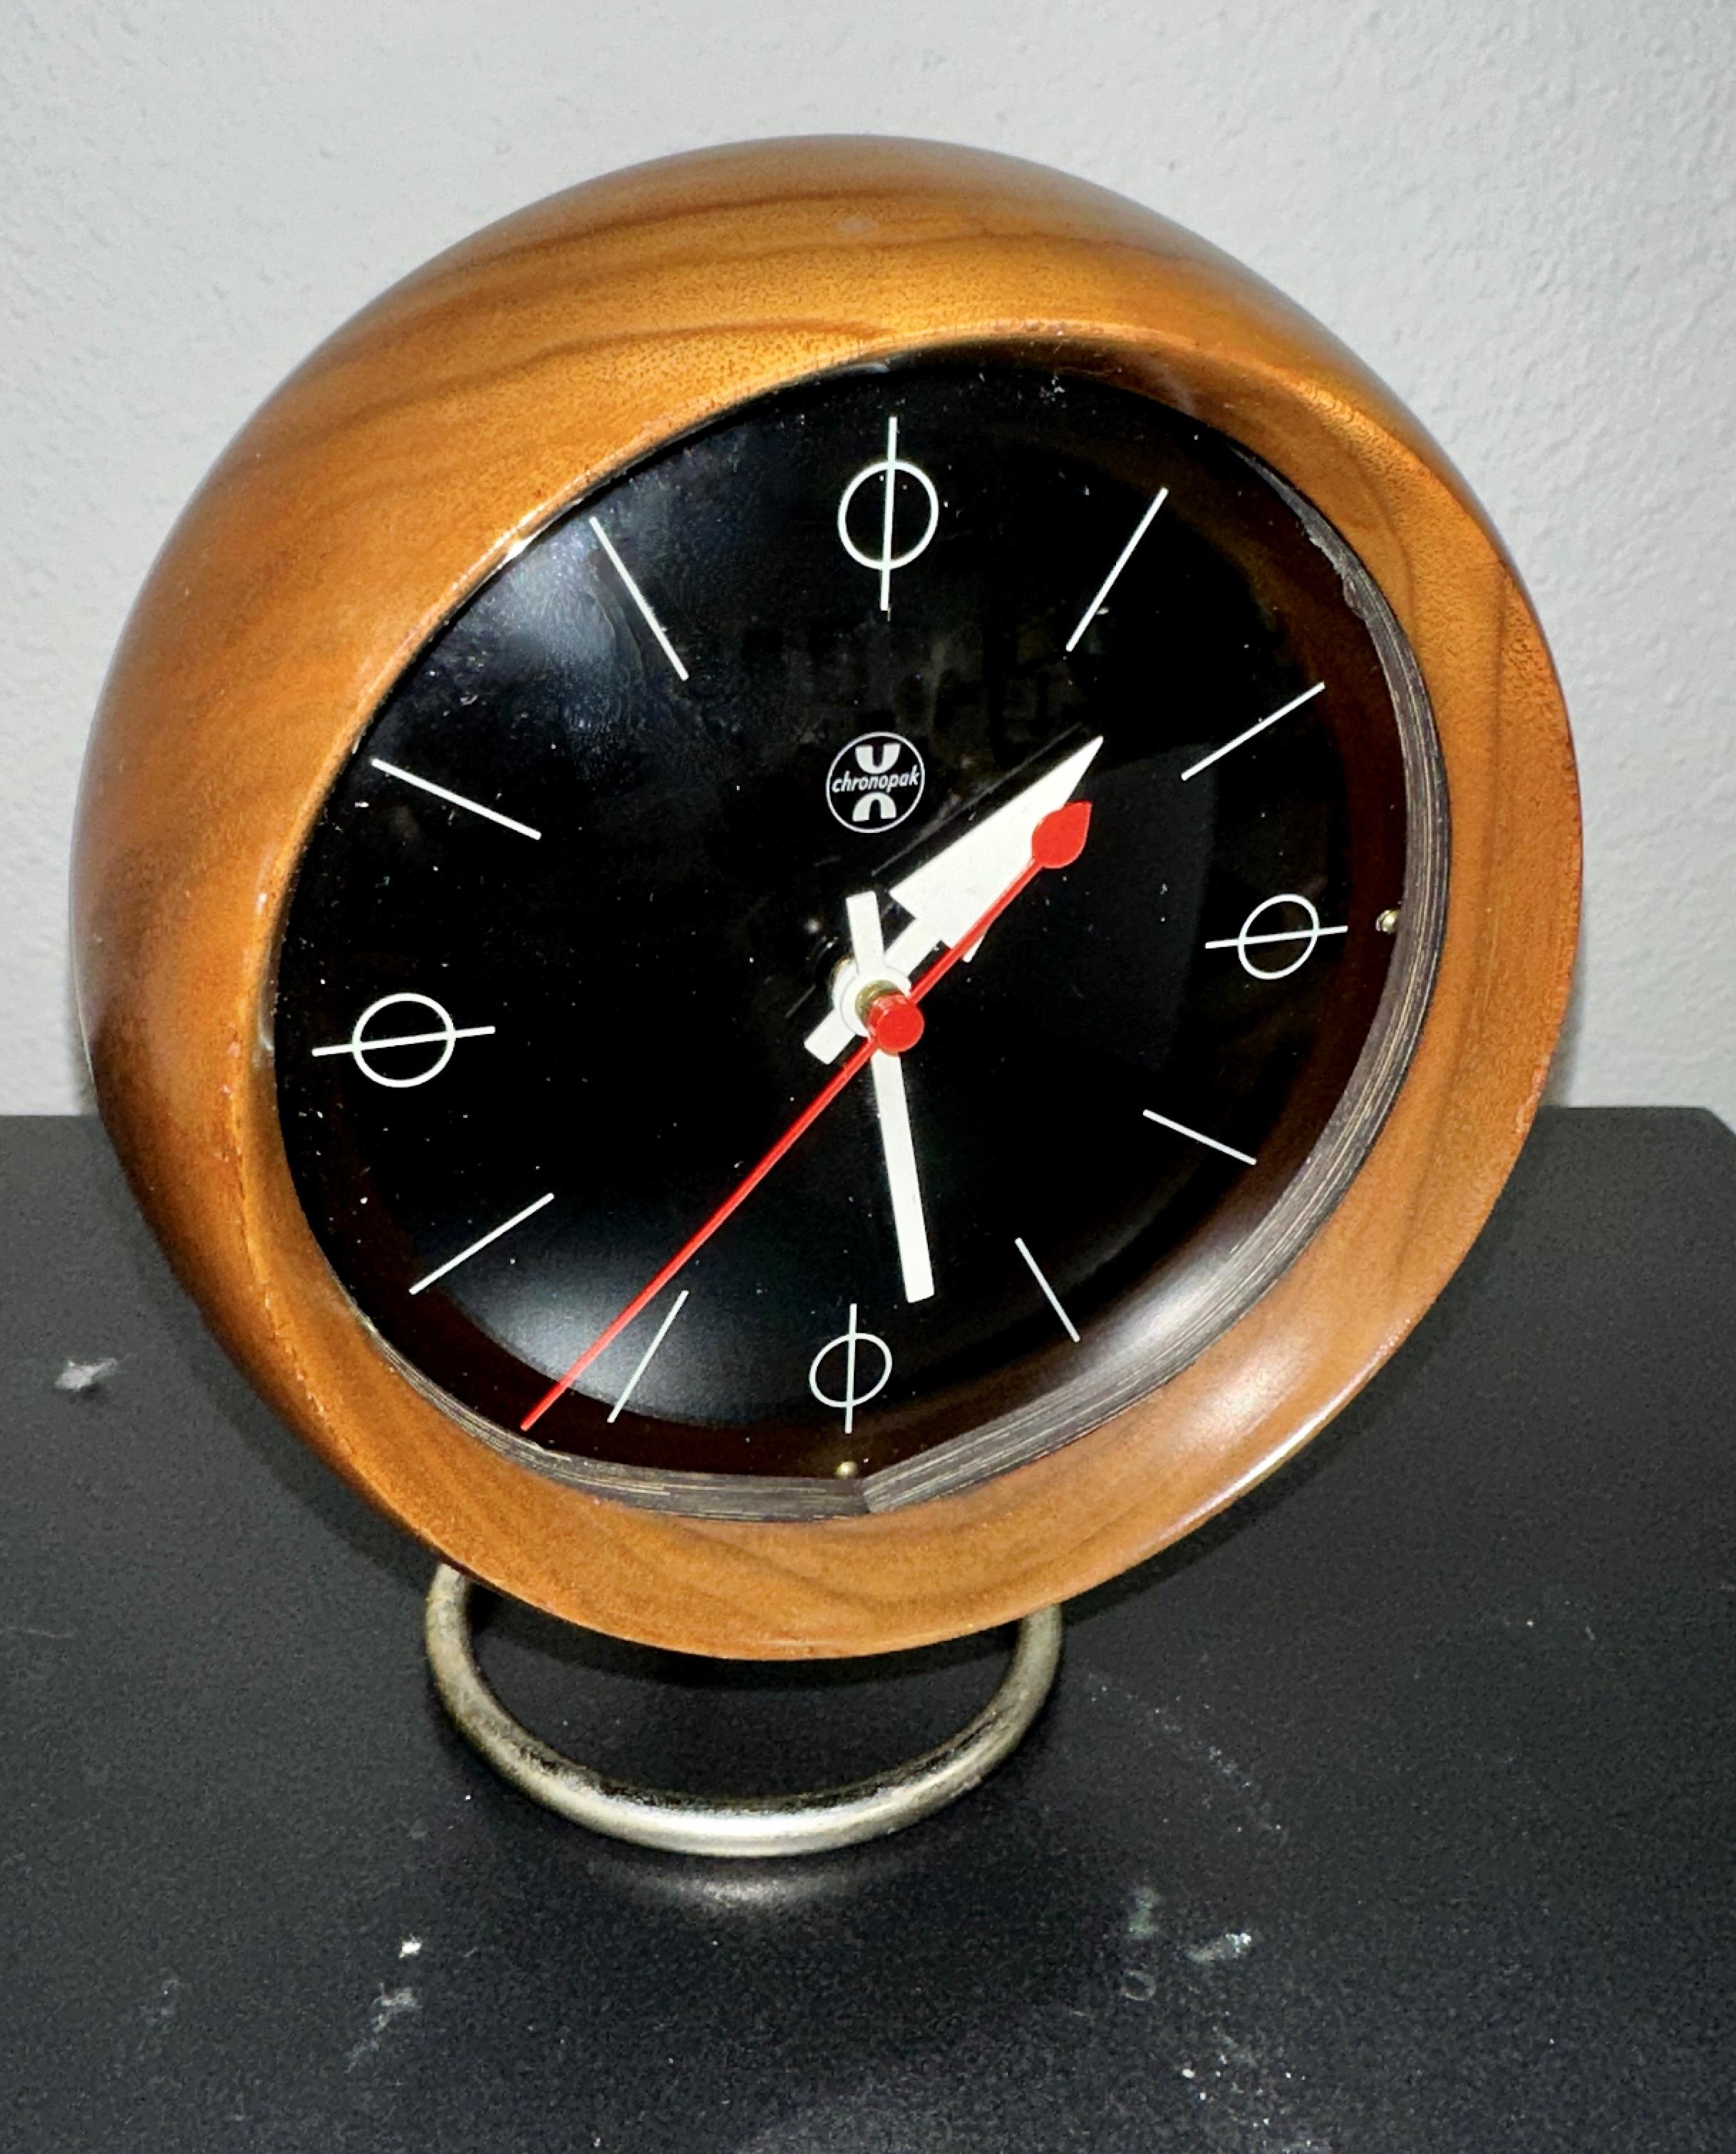 A wonderful example of a mid century design by George Nelson for the Howard Miller clock company, this Chronopak Model 4765A clock is in beautiful condition and running well and keeping time. It still retains it's original foil label on back. Please